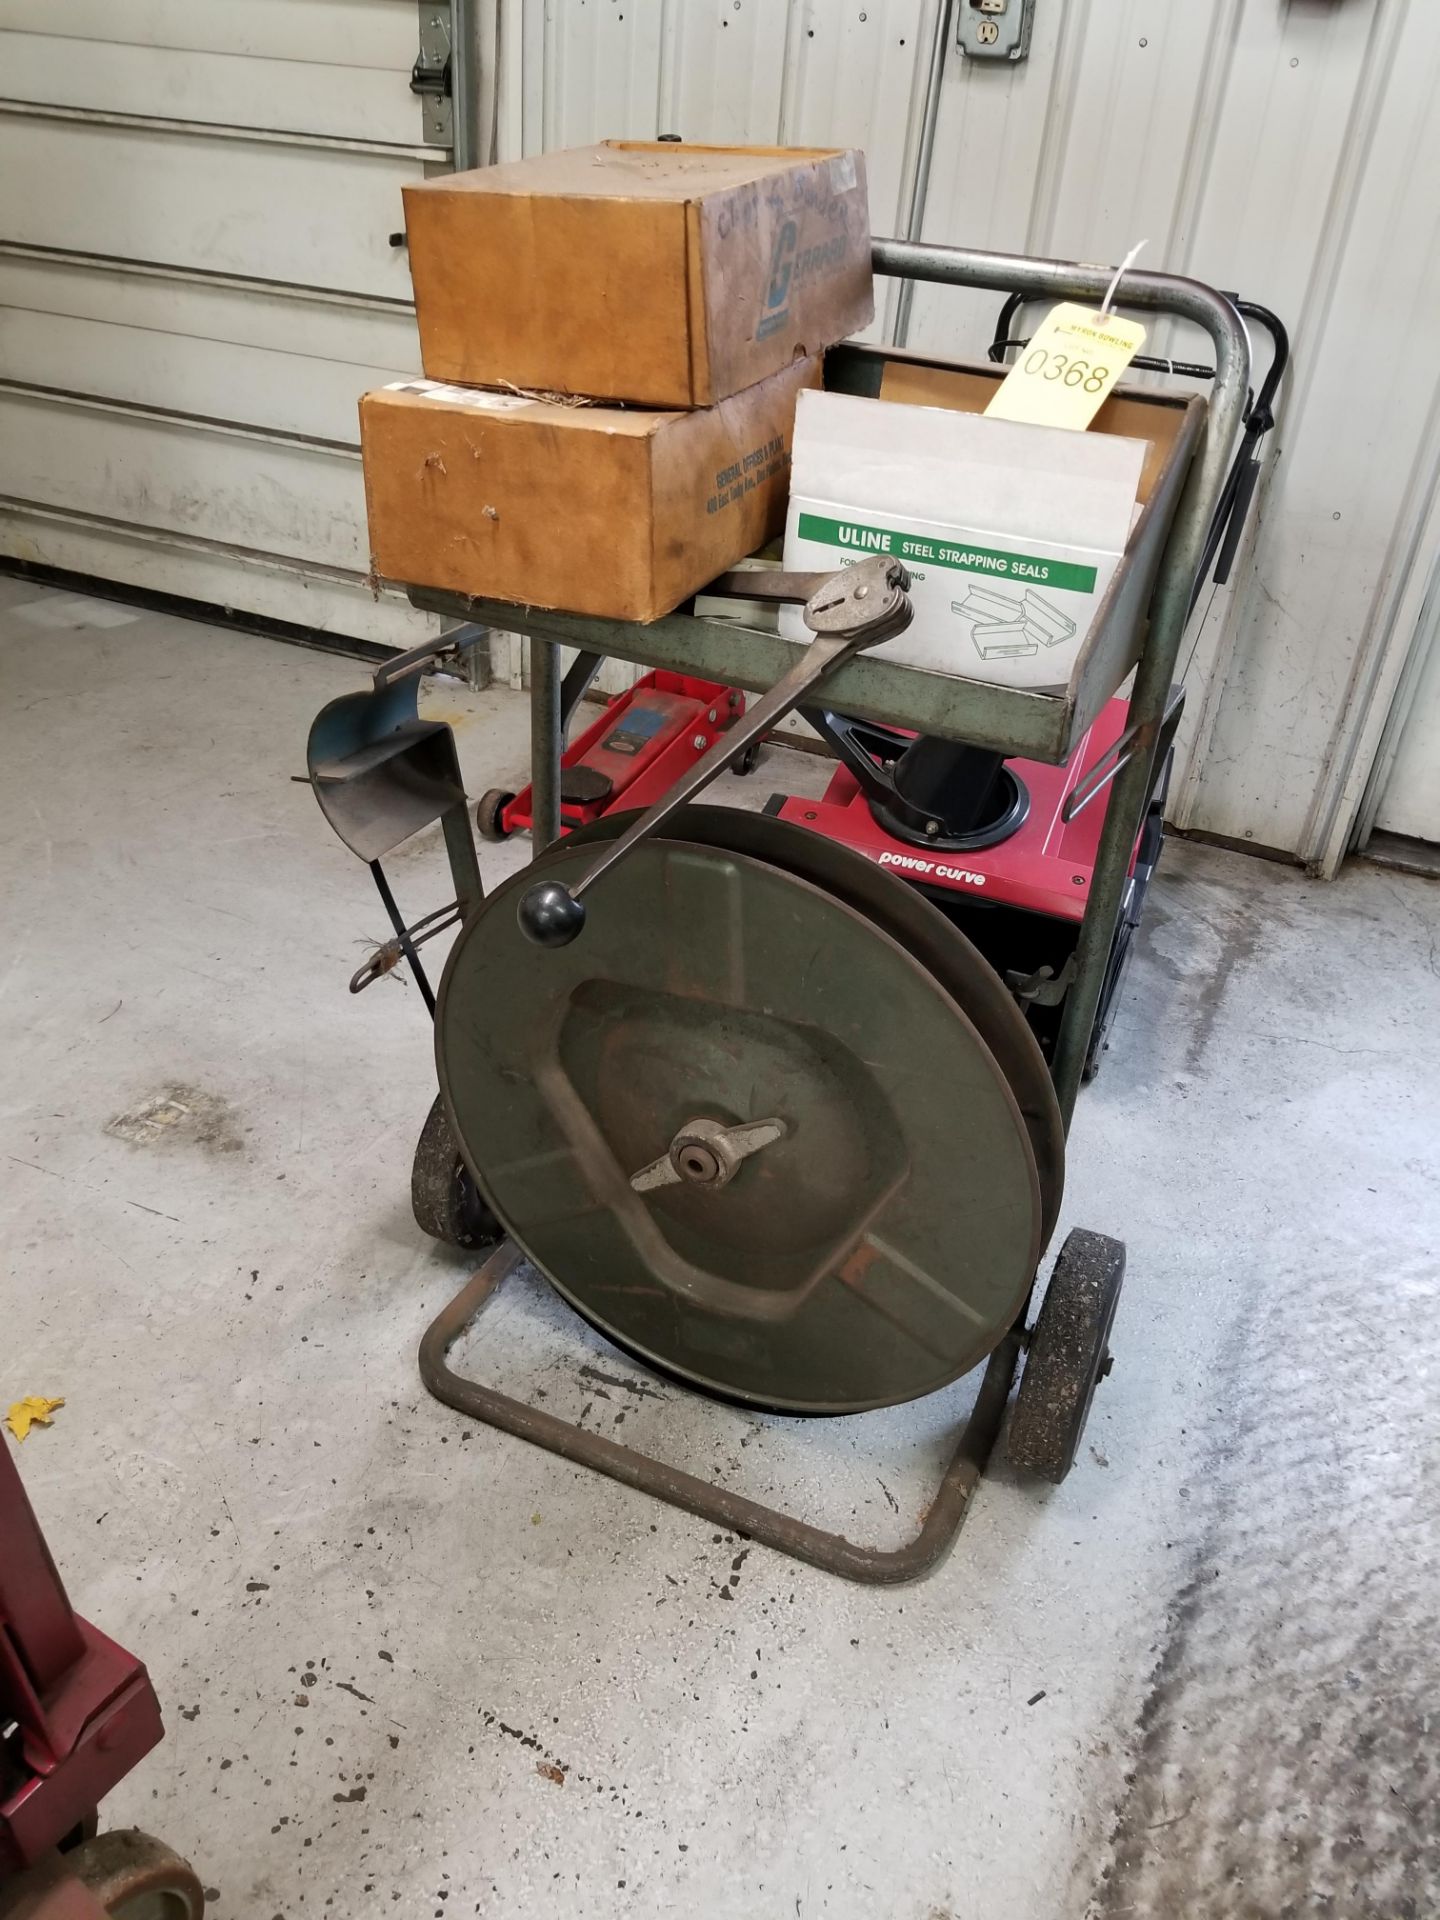 LOT: STEEL BANDING UNIT WITH BANDING TOOL, STEEL BANDING, AND CLIPS